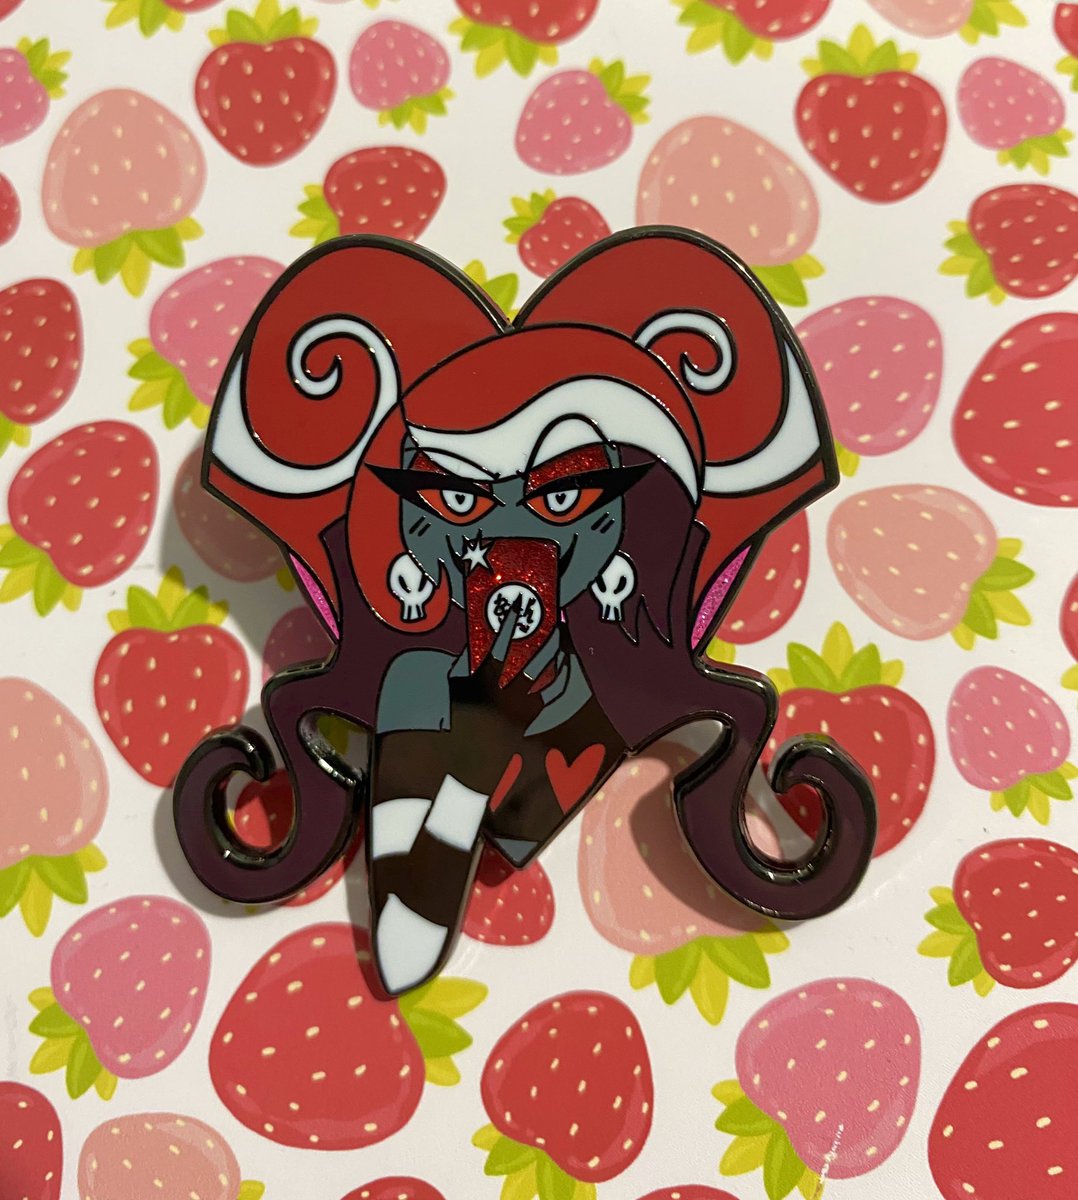 If you missed out on my Vox, Valentino, and Velvette pins, pre0rders are up for a rest0ck! 💖🦋📺📱 #HazbinHotel #HazbinHotelVox #HazbinHotelVelvette #HazbinHotelValentino #StaticMoth